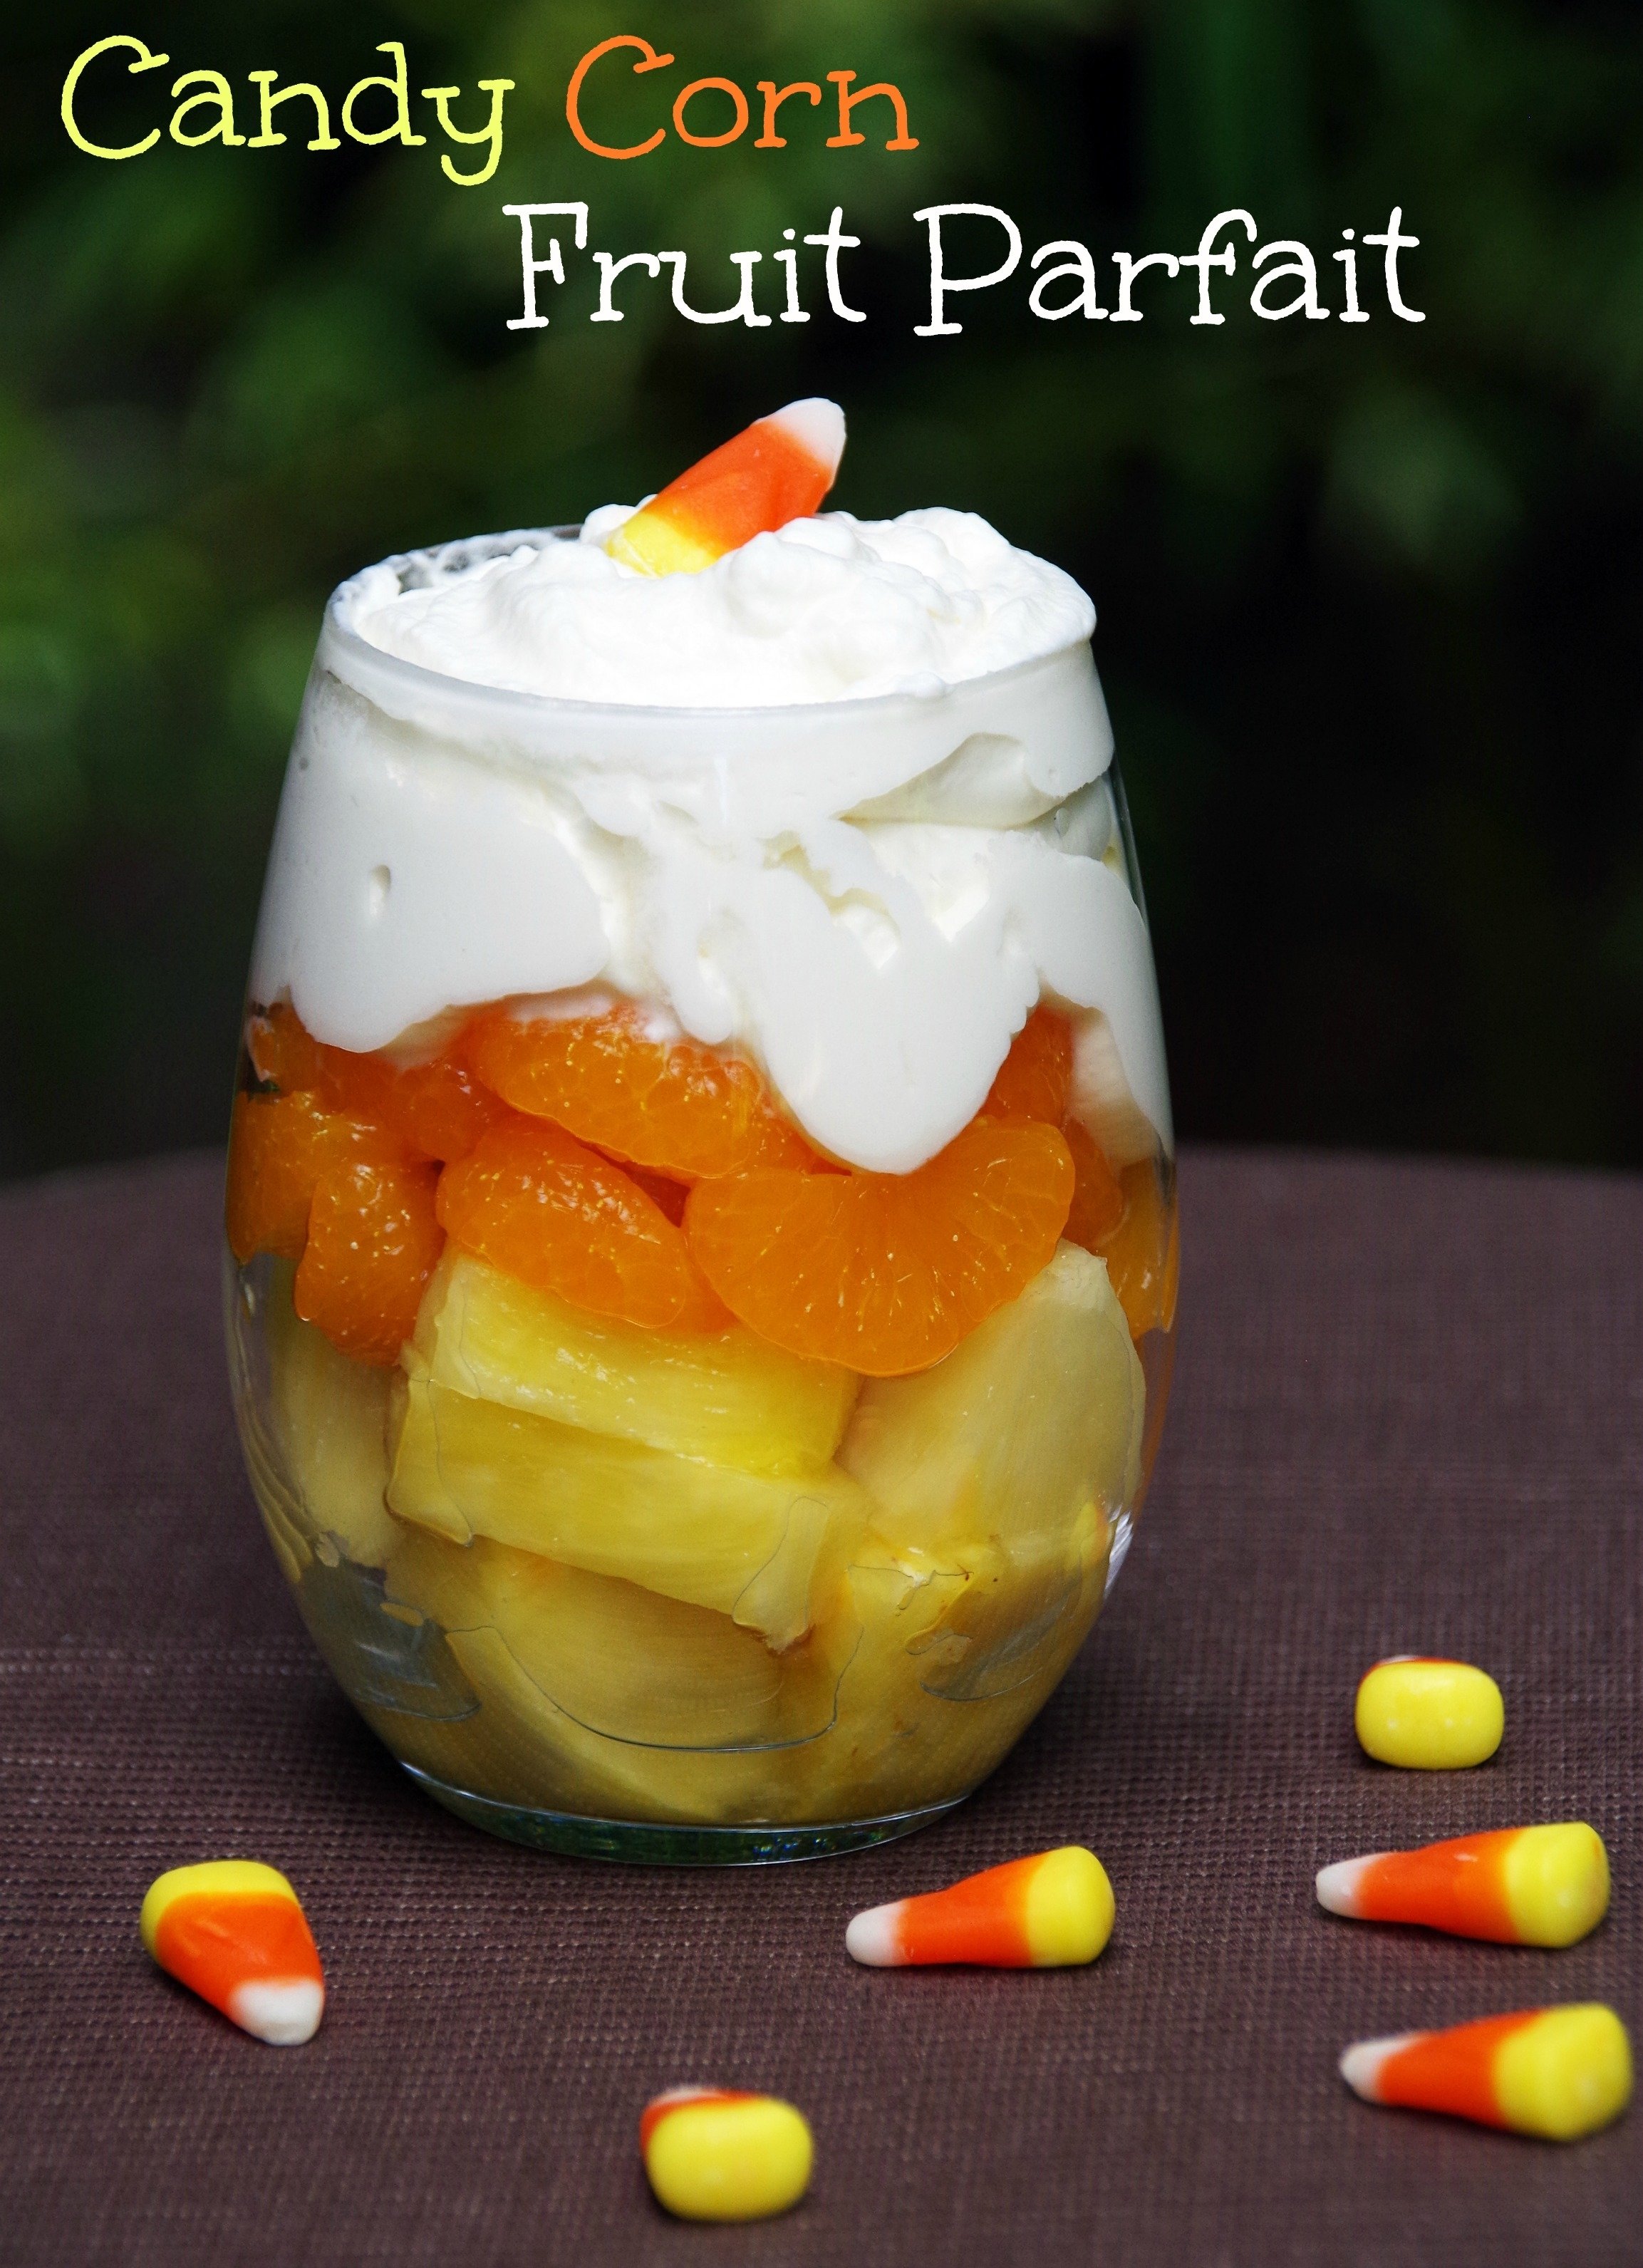 10 Ideal Halloween Food Ideas For Adults healthy halloween dessert candy corn fruit parfait suburbia unwrapped 2022